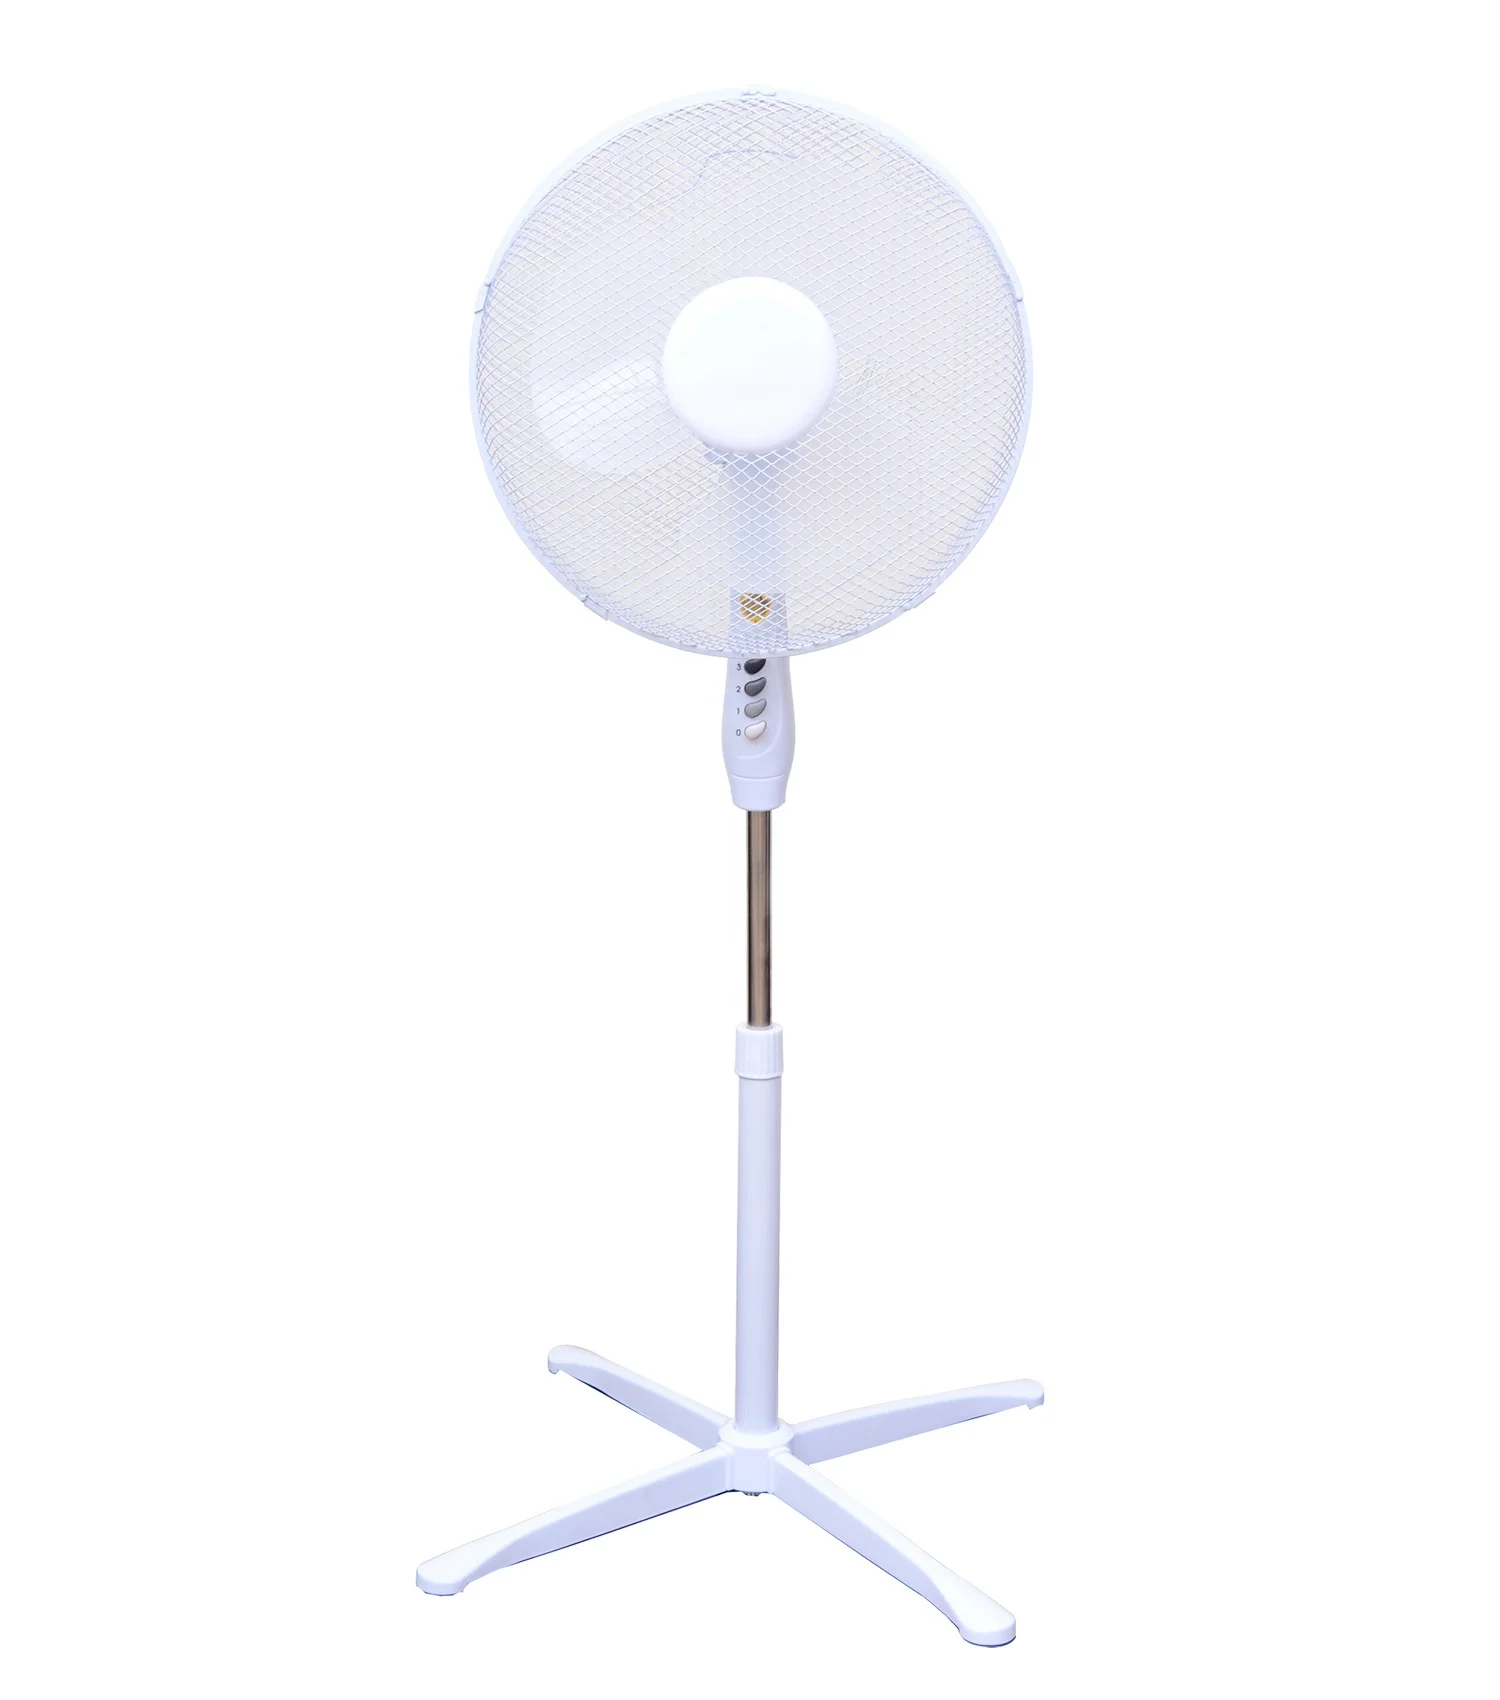 16 inch electric oscillating stand fan 18 inch Tower & Pedestal Fans